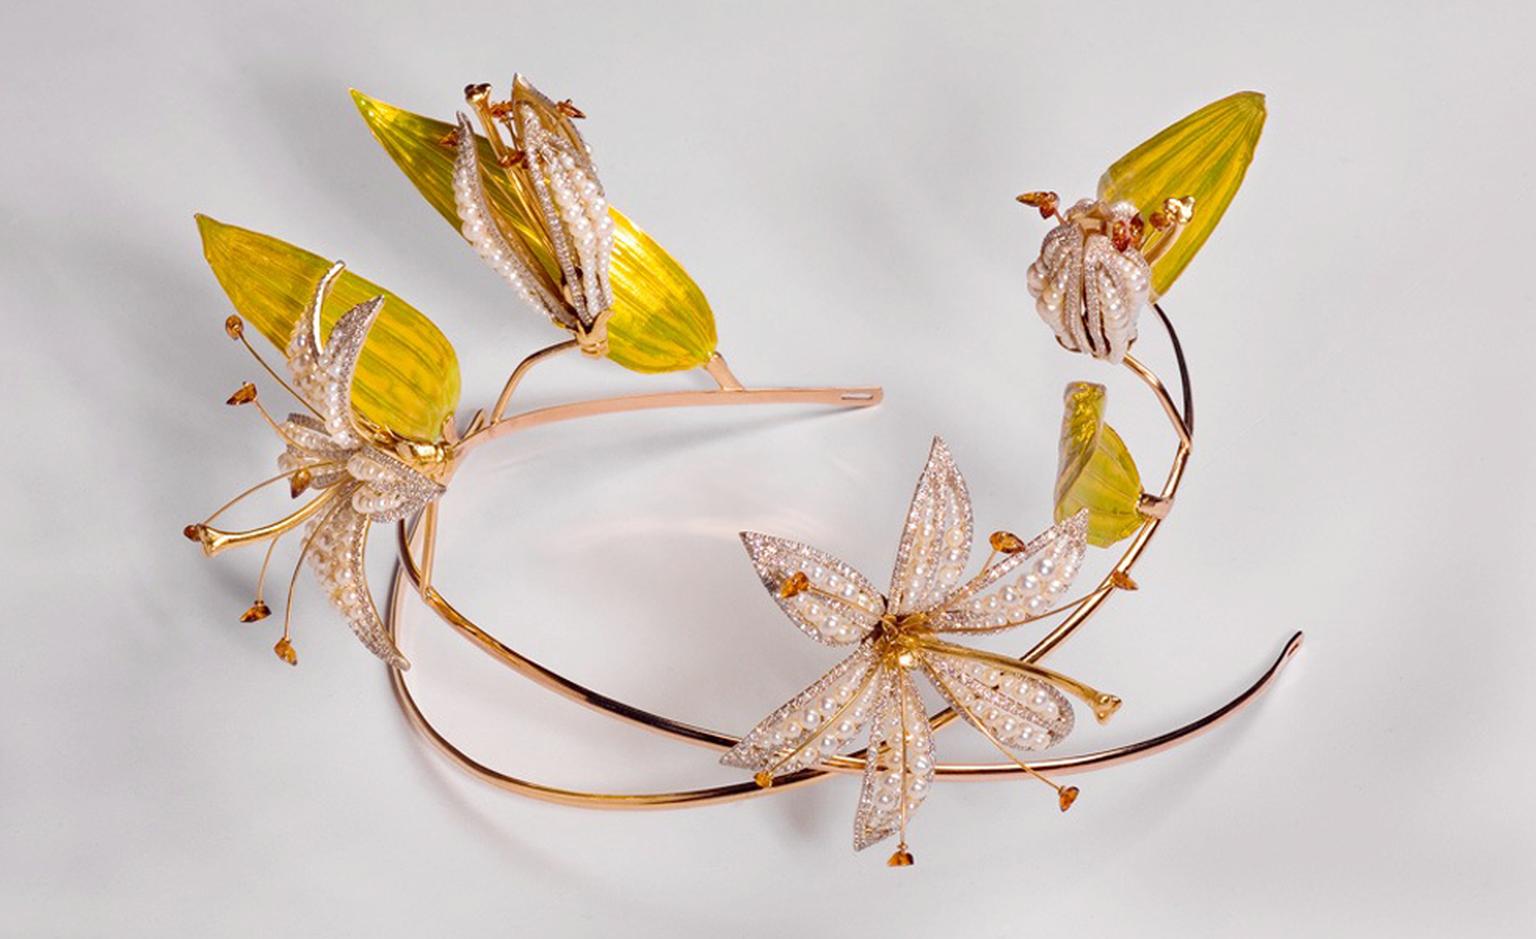 ARK, lilies, 2007, madeira  citrine, 18 carat gold and enamelled 24 carat gold leaves. POA.